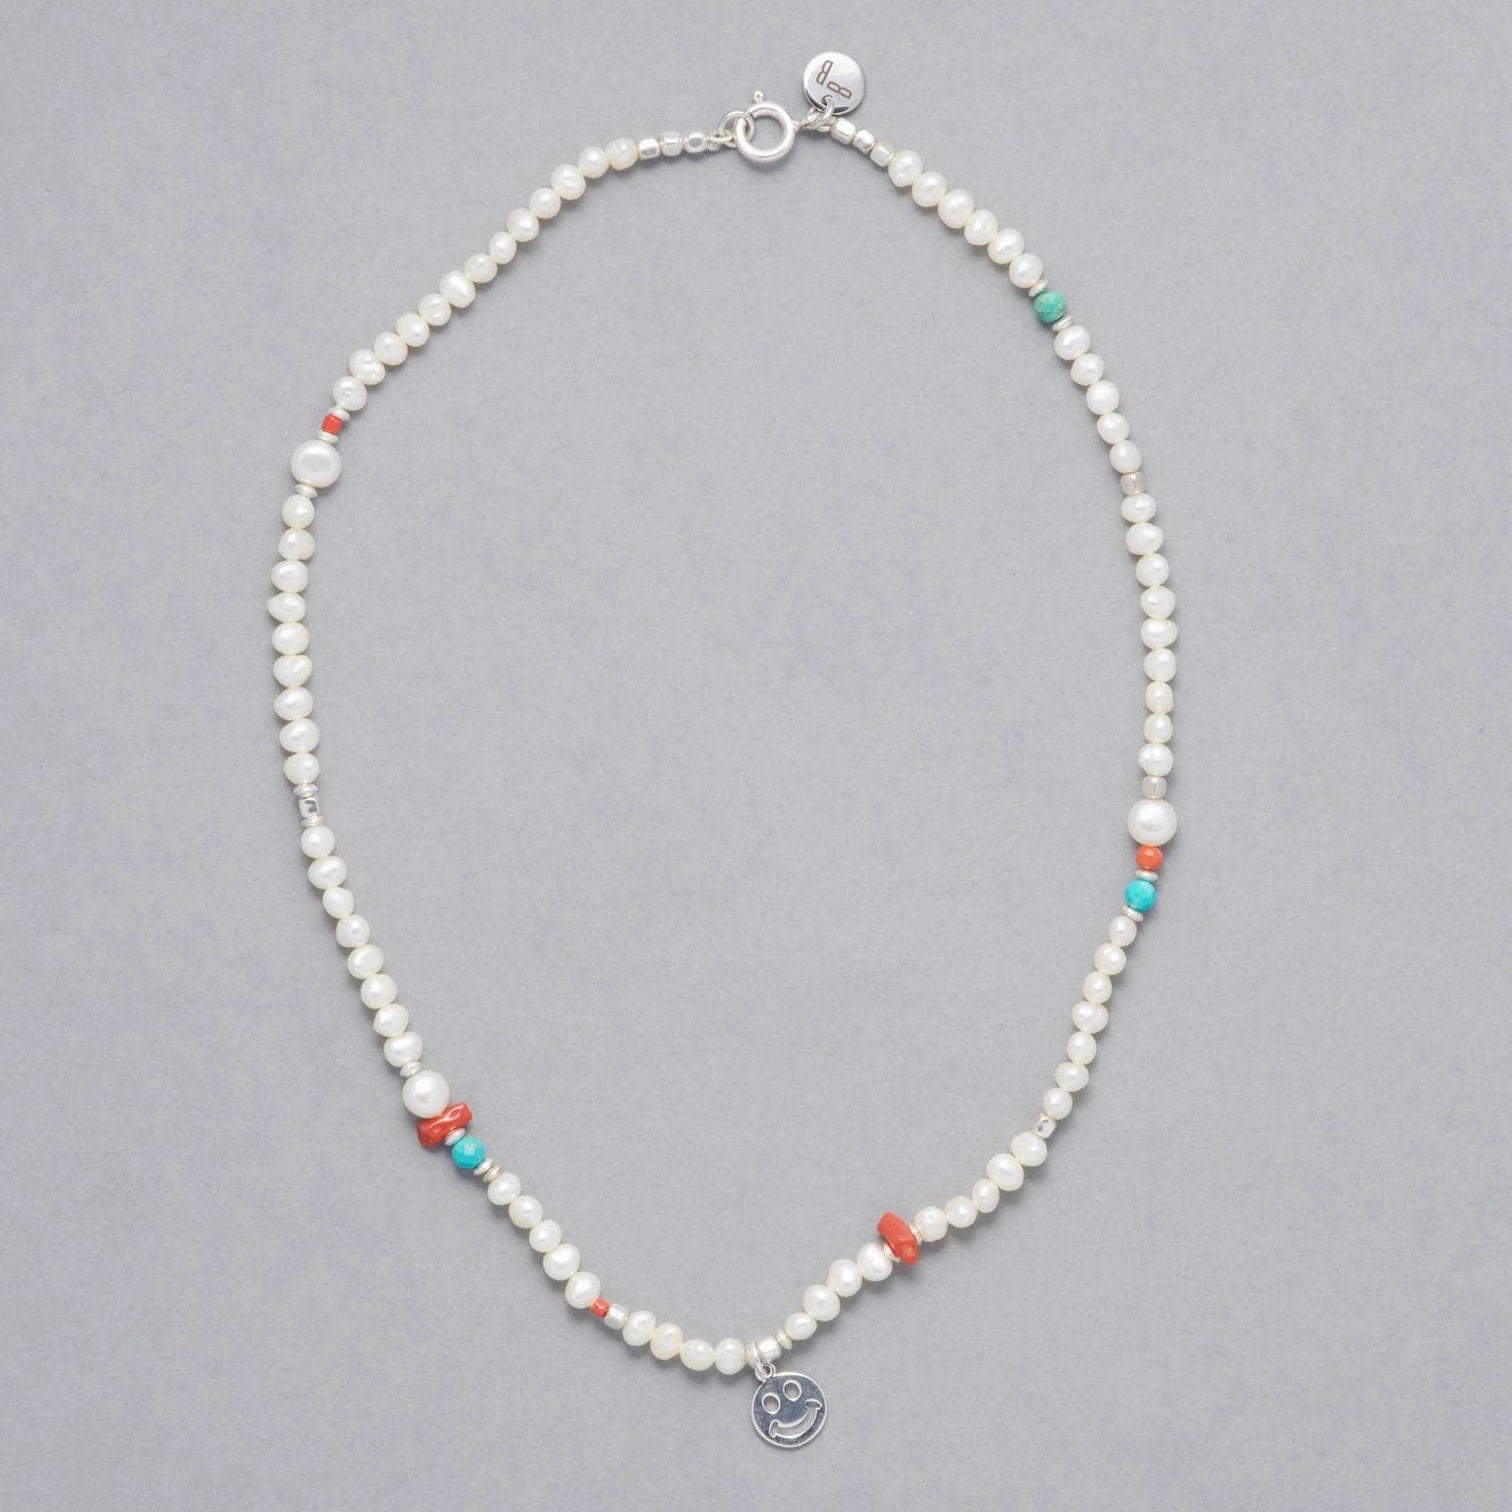 The ALAIA Necklace consists of beautiful Cultured Freshwater White Pearls and an uplifting touch of Coral and Turquoise and a Silver Sterling Smiley Charm.